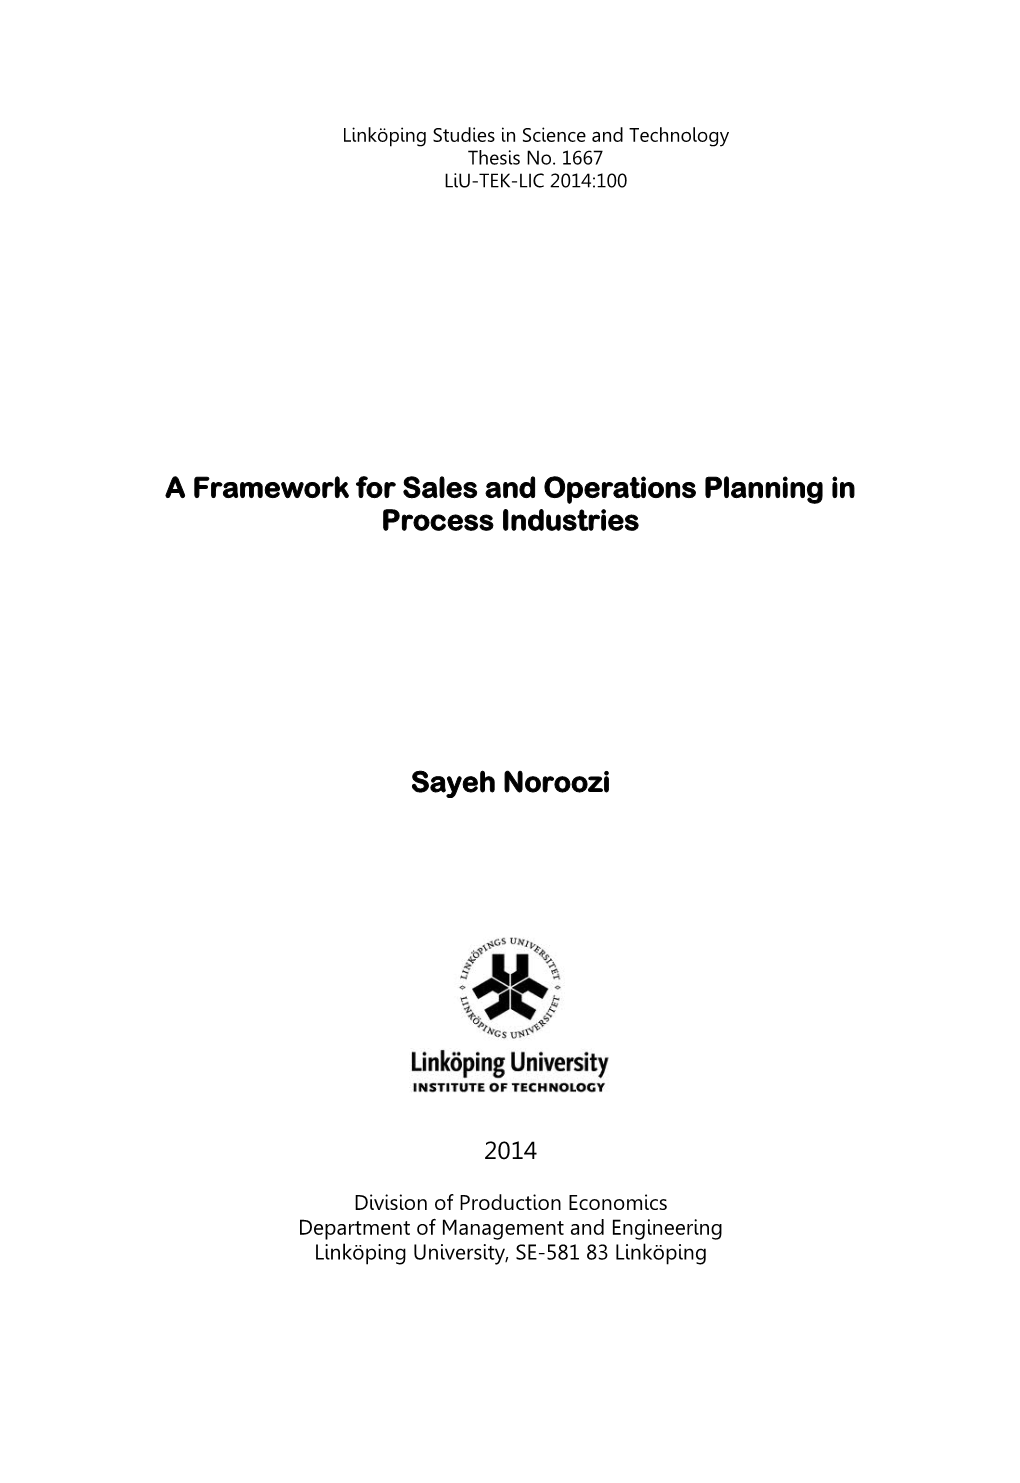 A Framework for Sales and Operations Planning in Process Industries